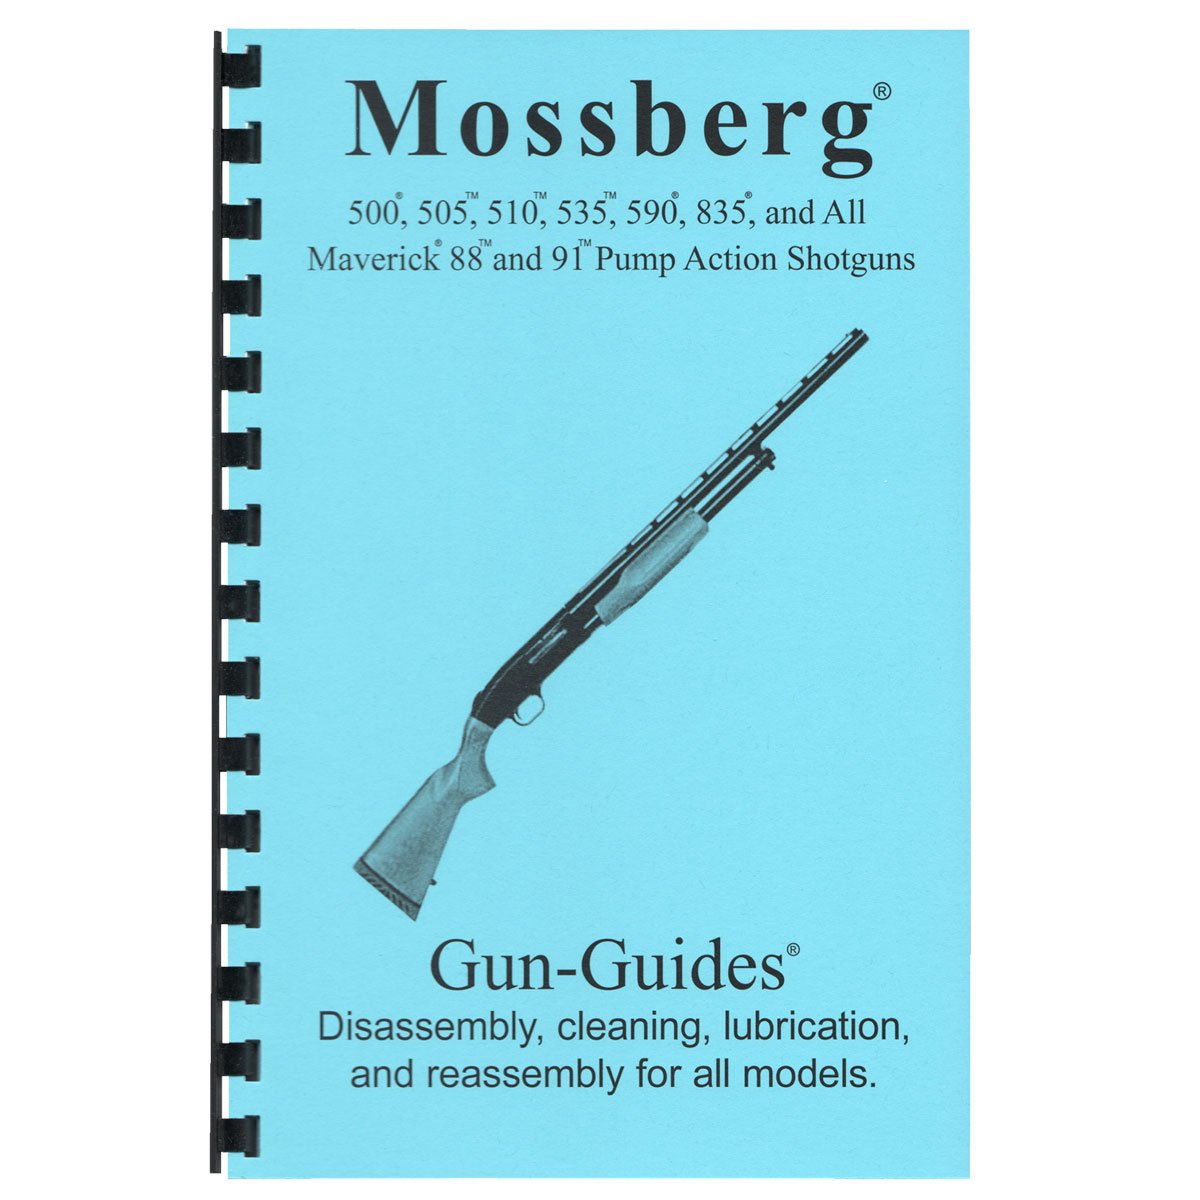 GUN-GUIDES - ASSEMBLY-DISASSEMBLY GUIDE FOR THE MOSSBERG 500, 535, 590, & 835